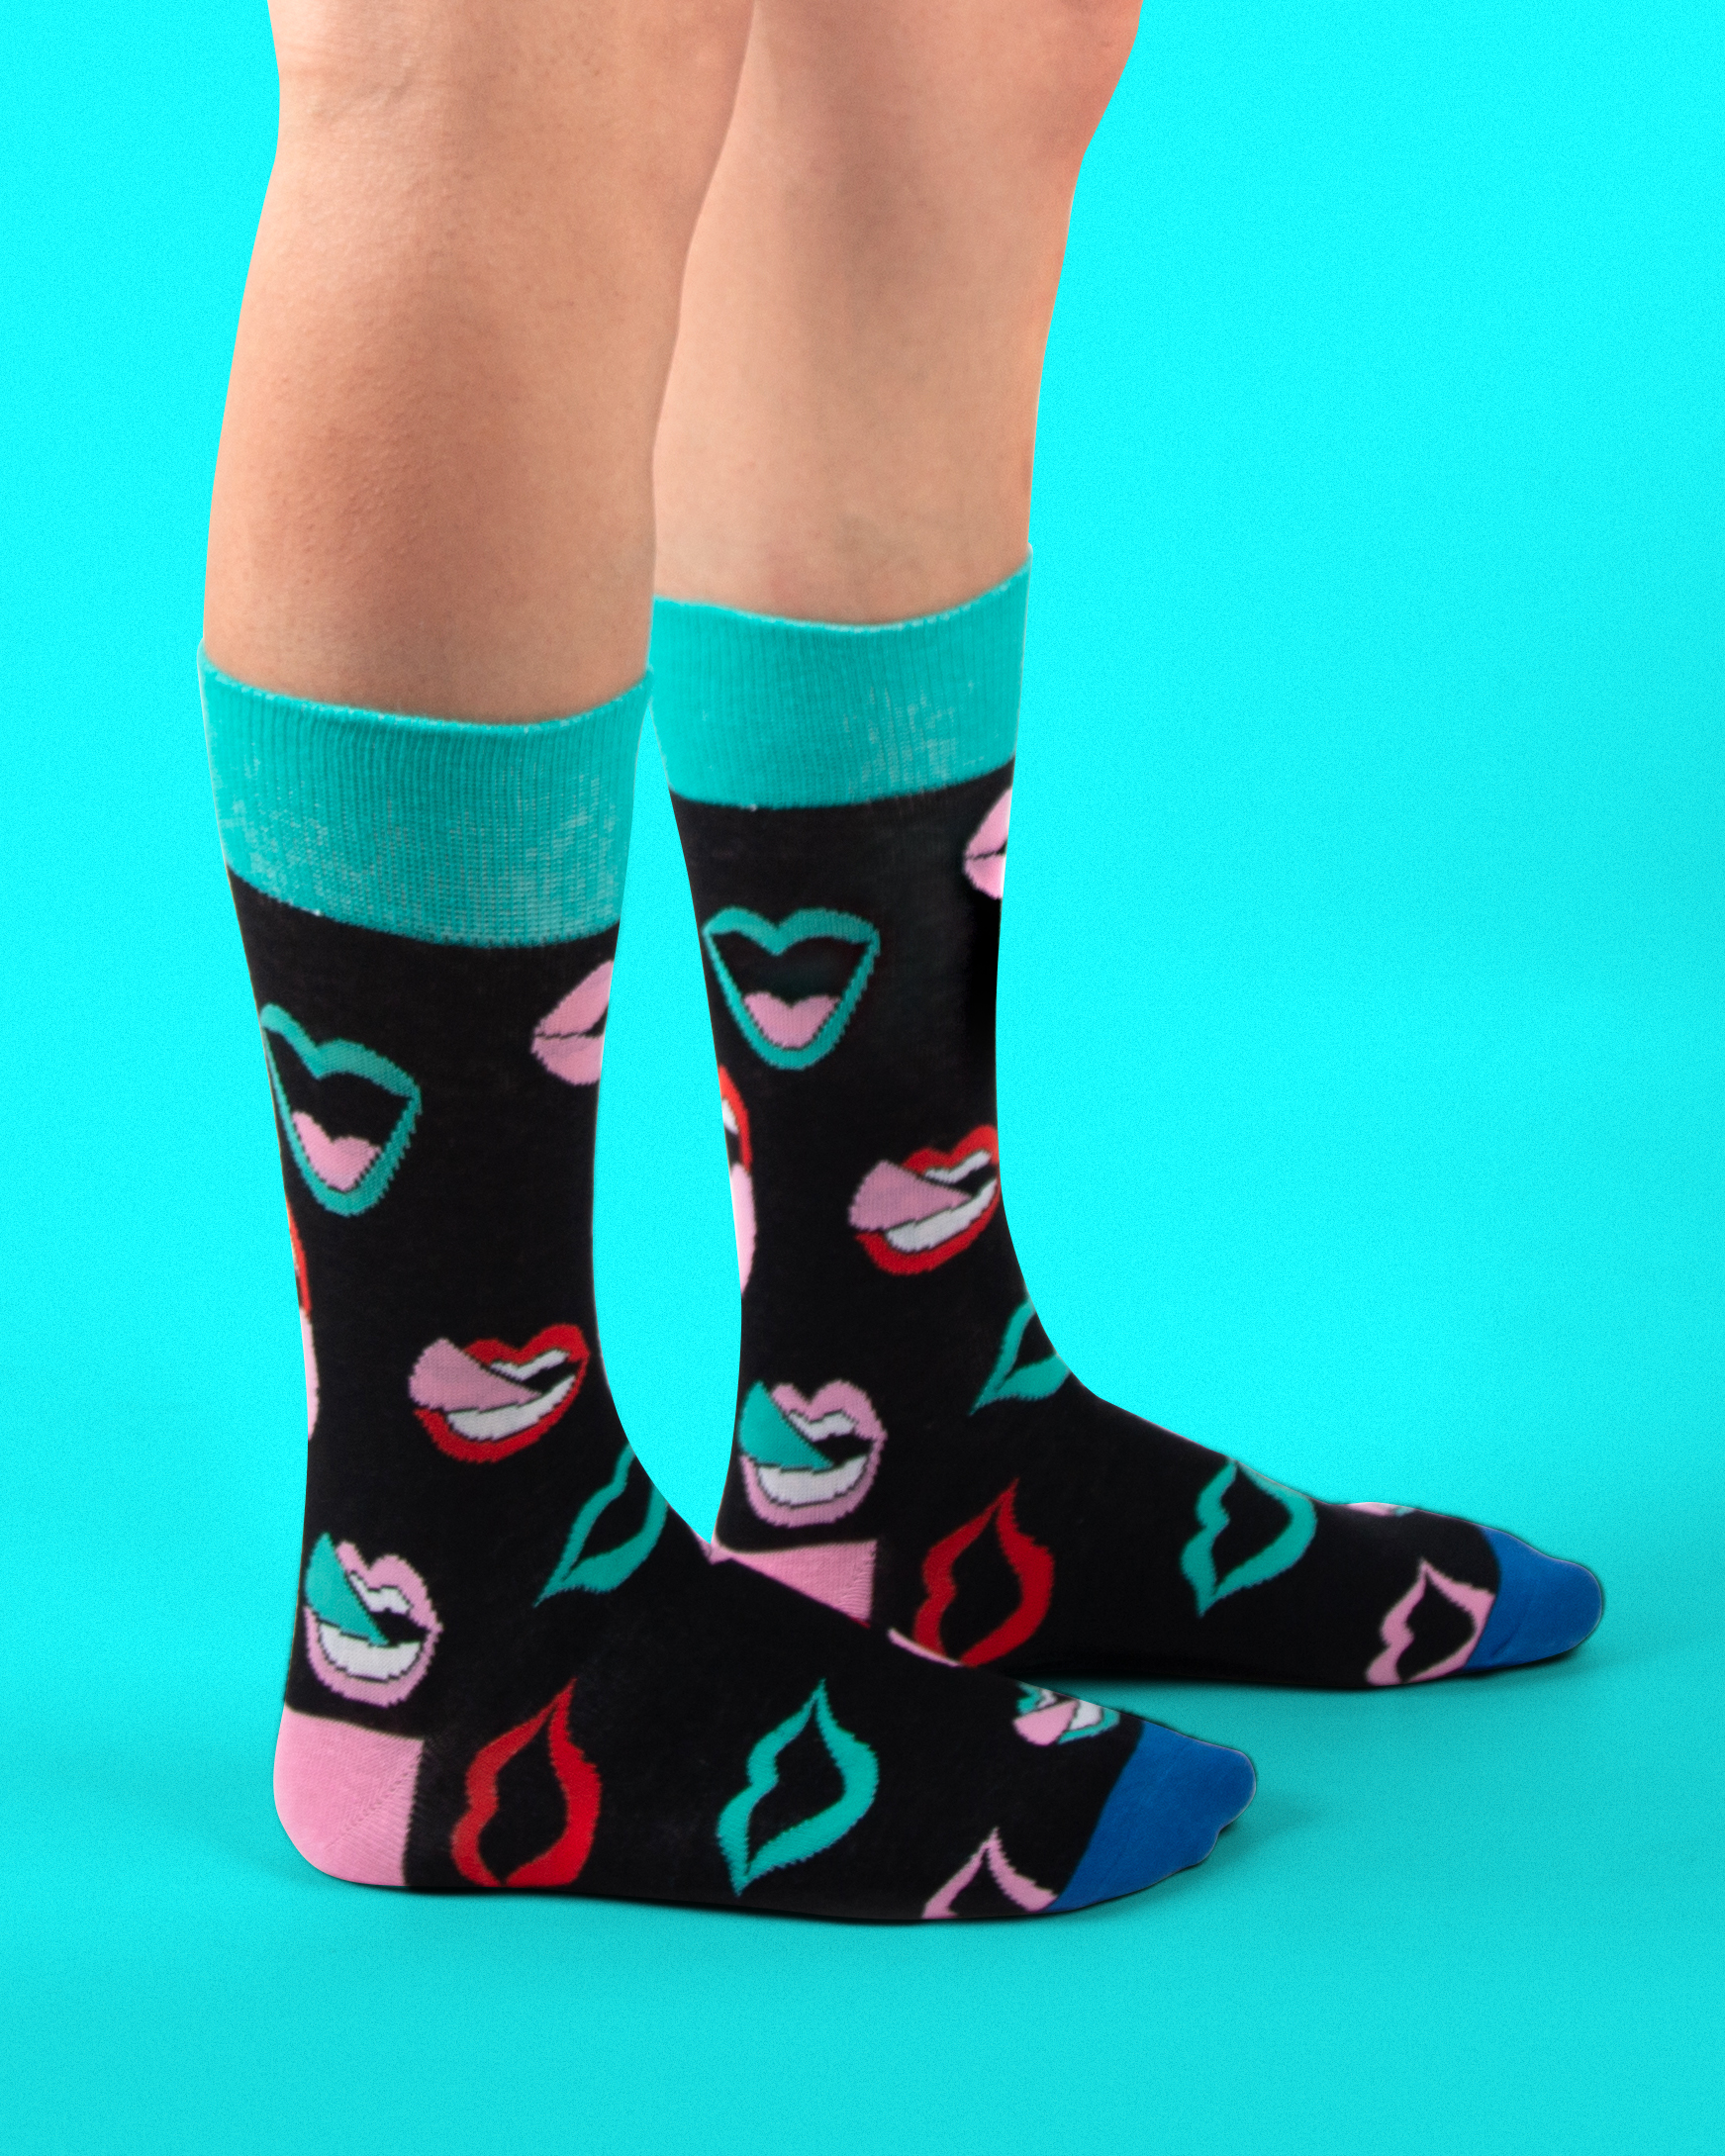 Sexy Lips Socks Lowpriced Cotto